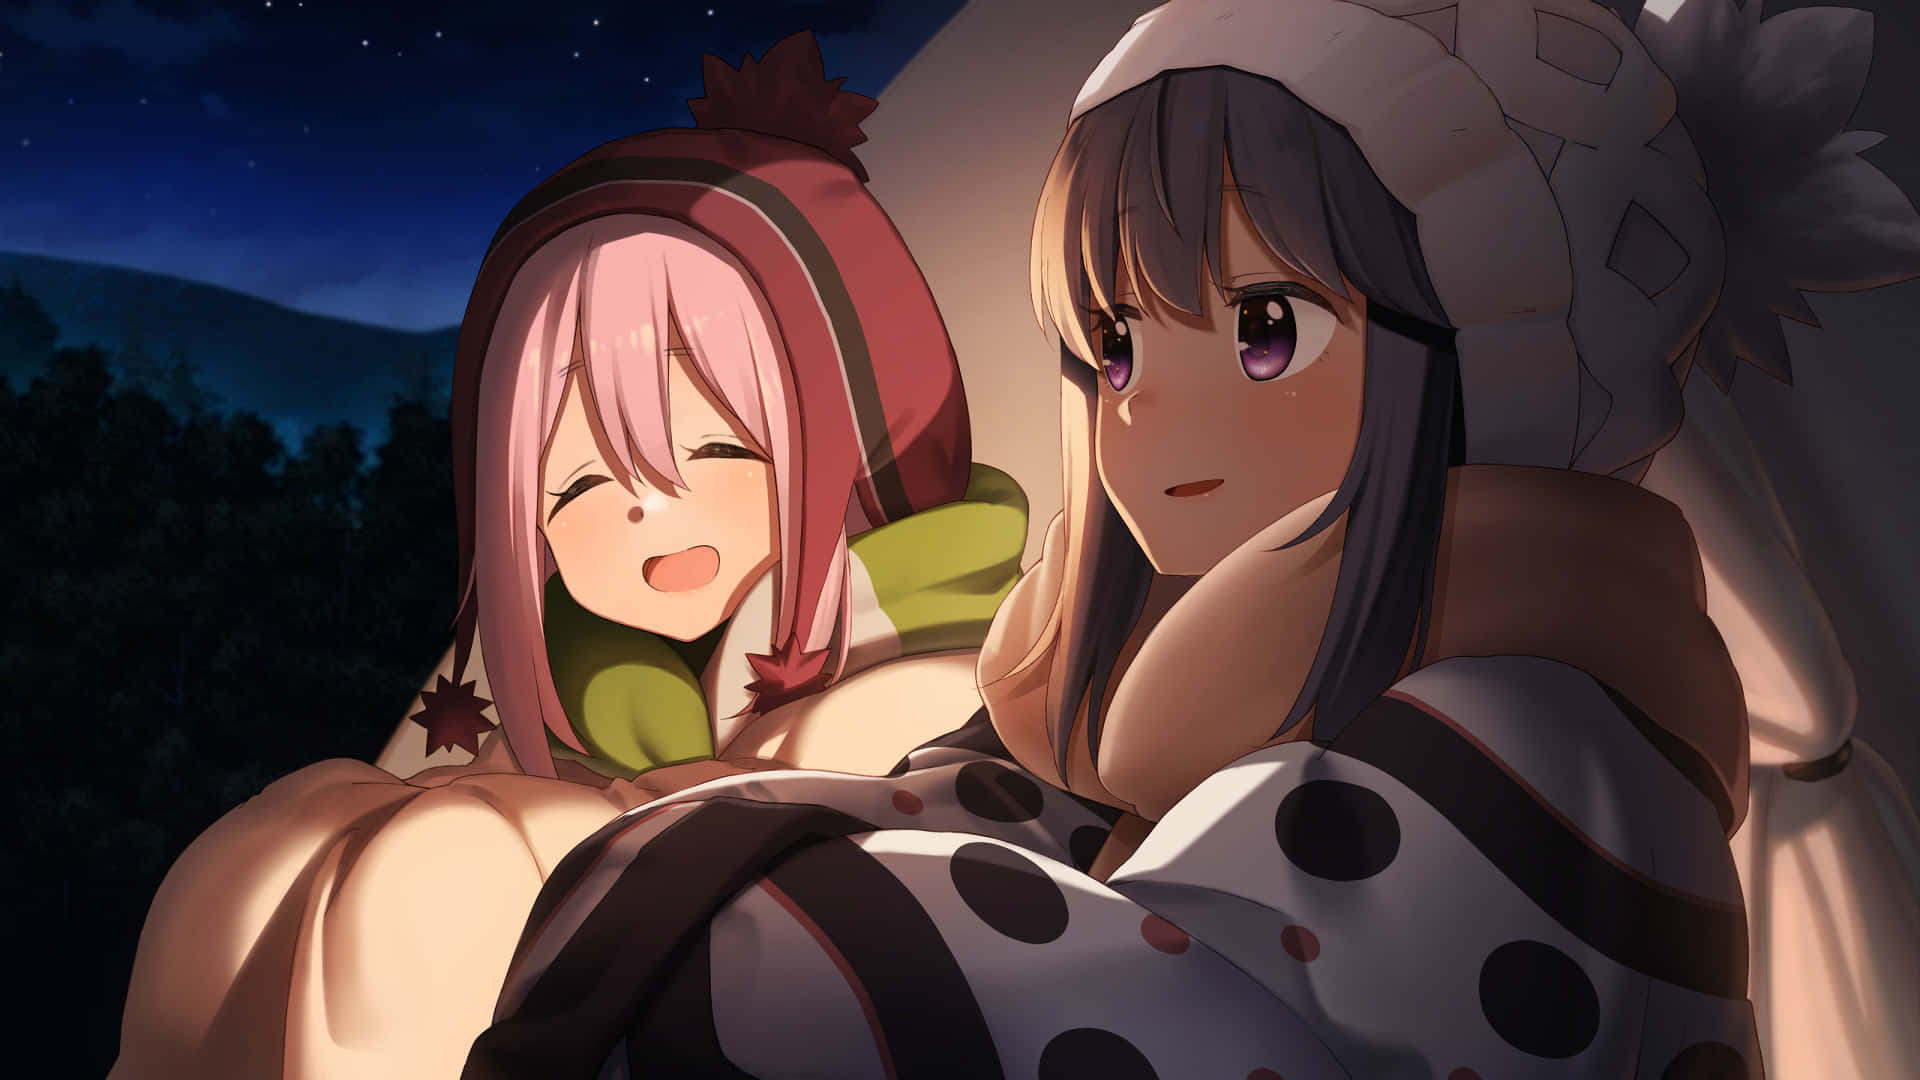 Spend a peaceful night camping with your friends!